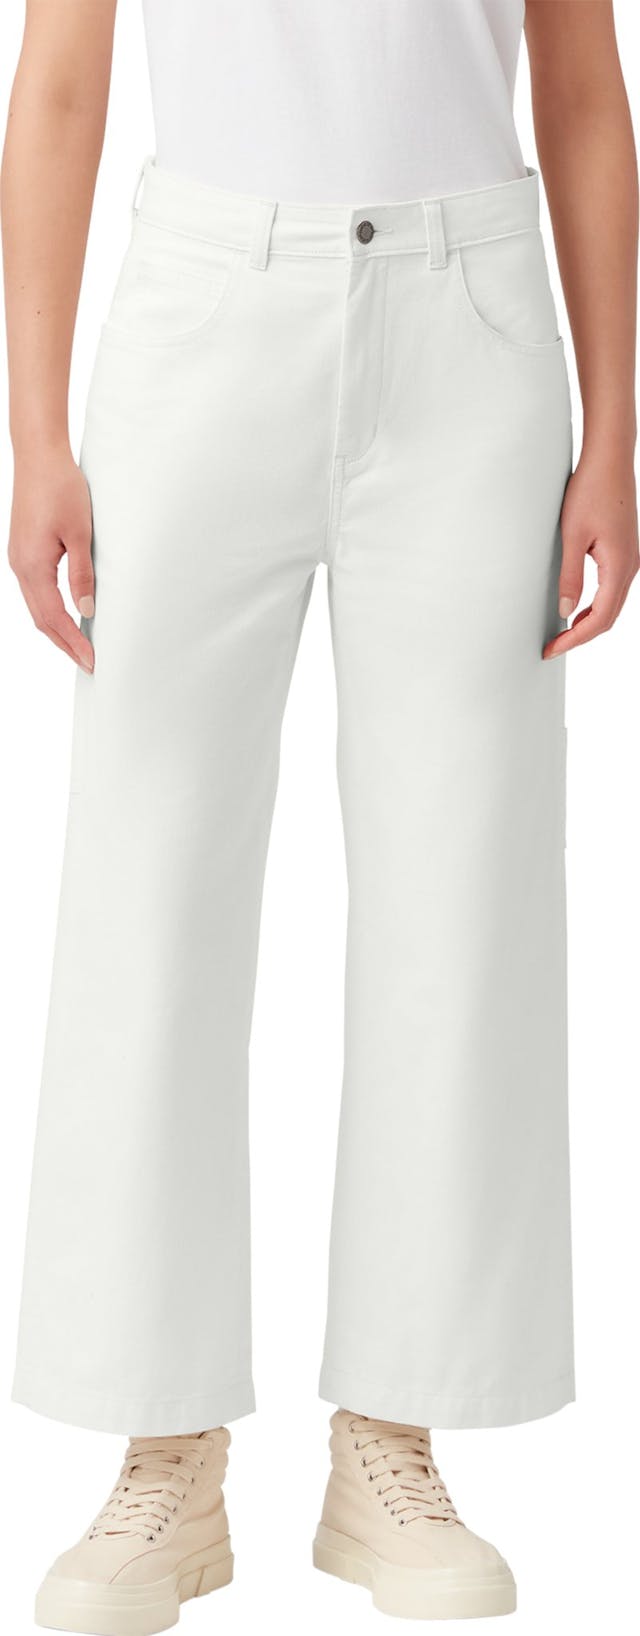 Product image for Stonewashed Cropped Carpenter Pants - Women's